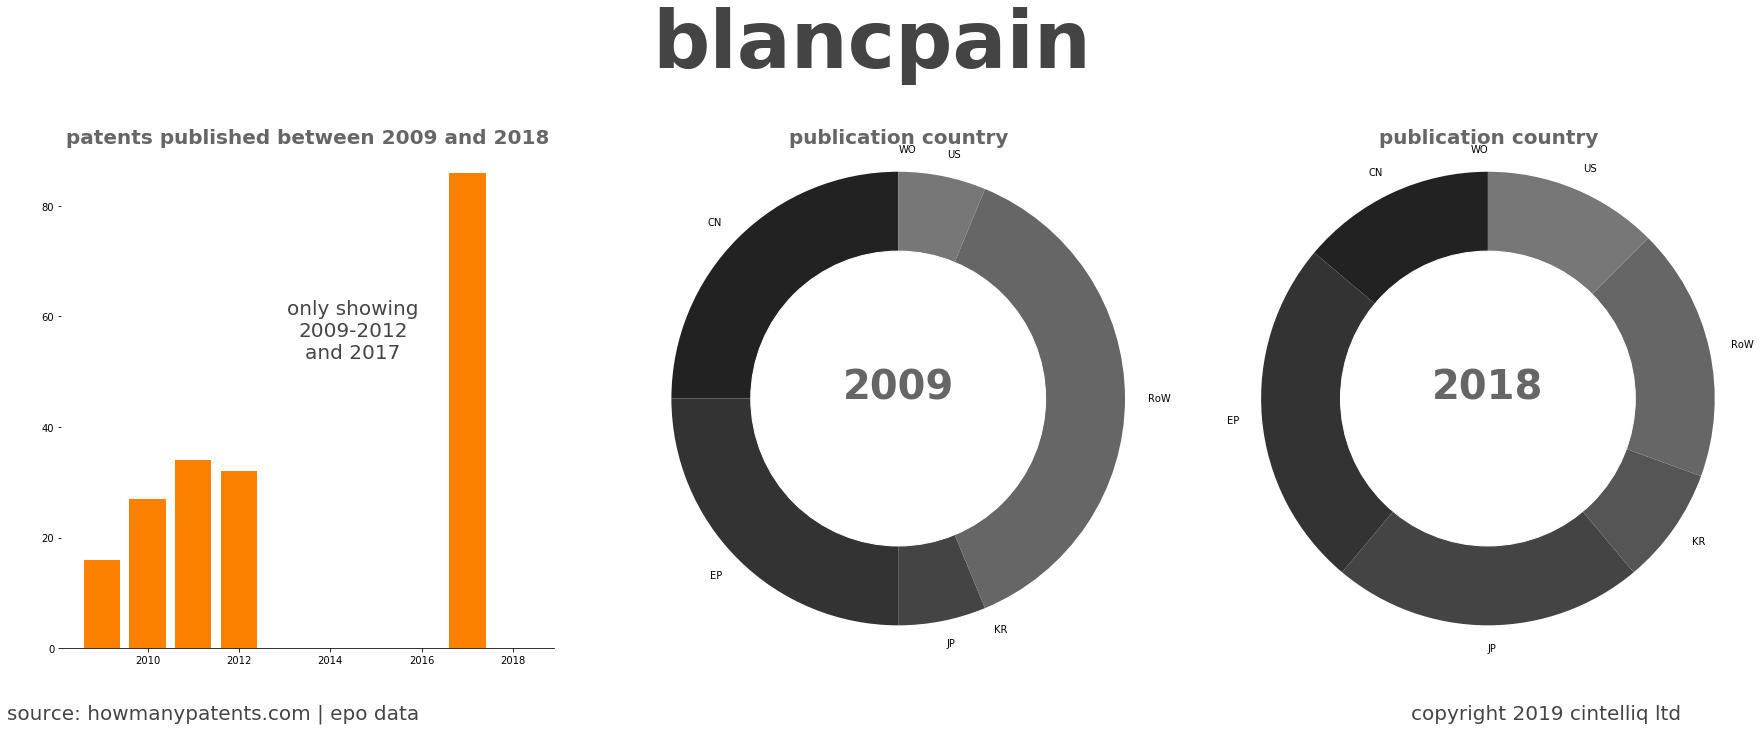 summary of patents for Blancpain